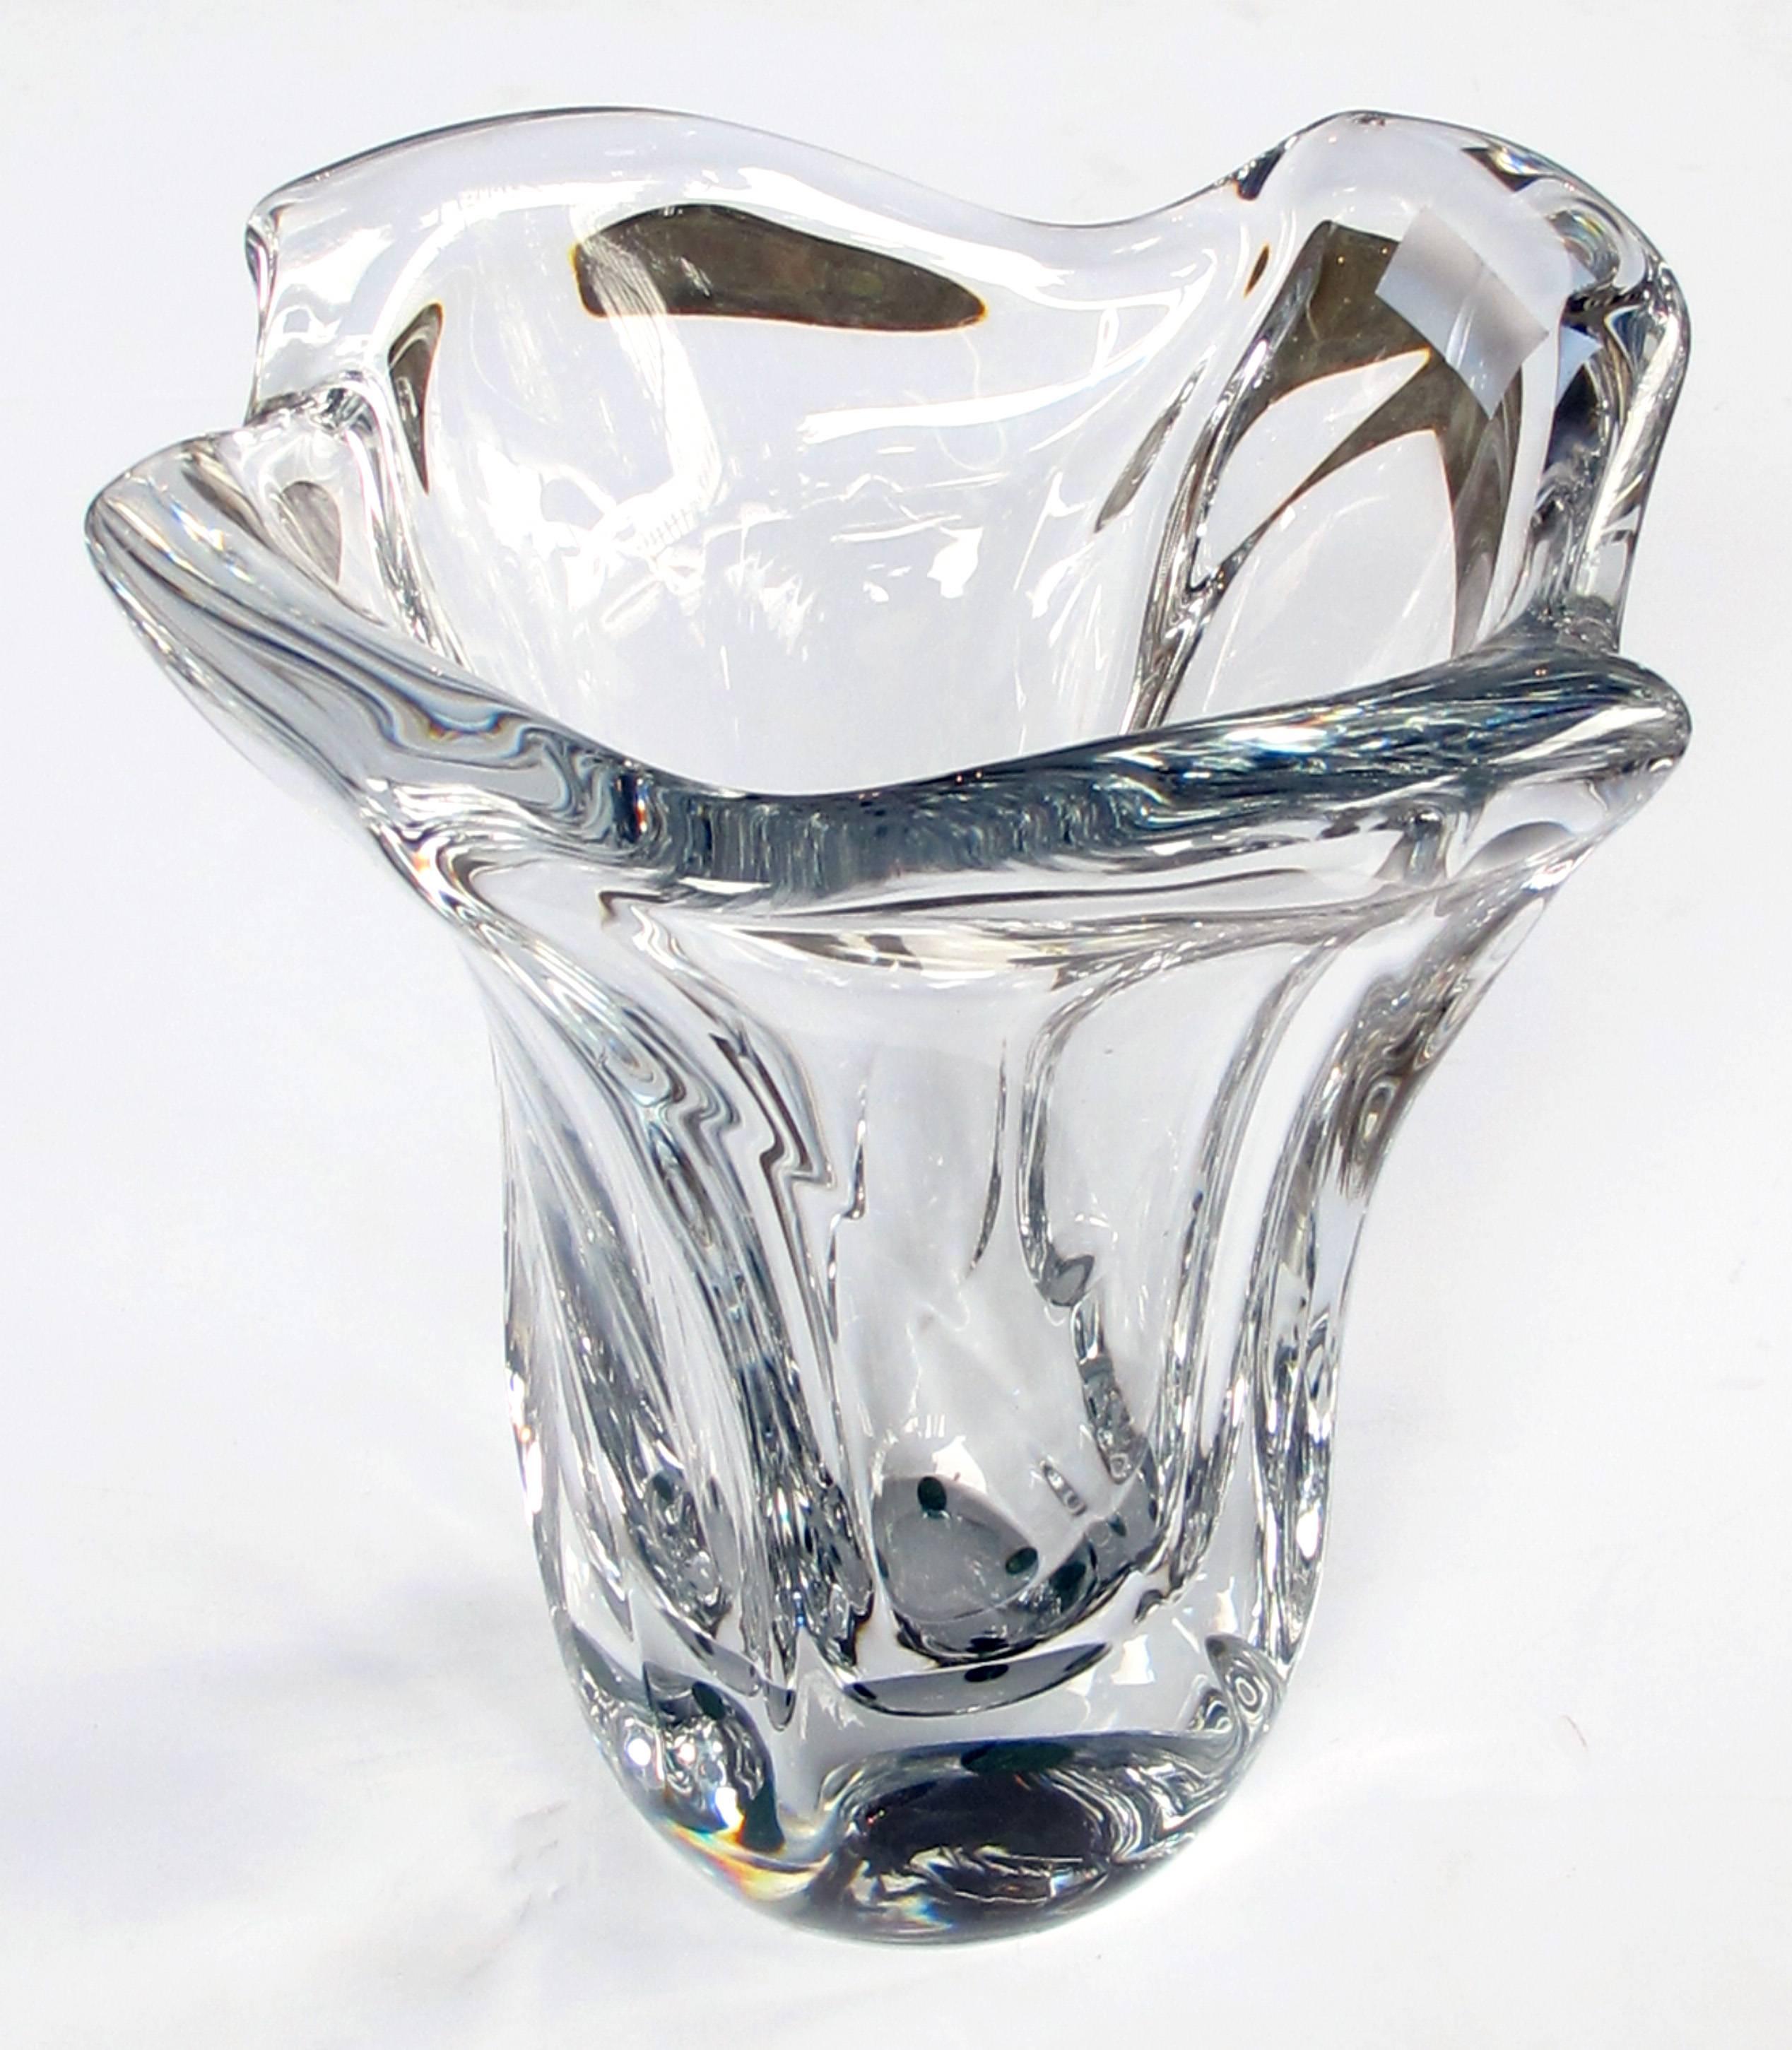 Of large-scale, the shimmering crystal vase with lobed mouth tapering to the base; with acid etched signature 'Daum France' separated by the cross of Lorraine indicating early production pieces, 1945-1950.